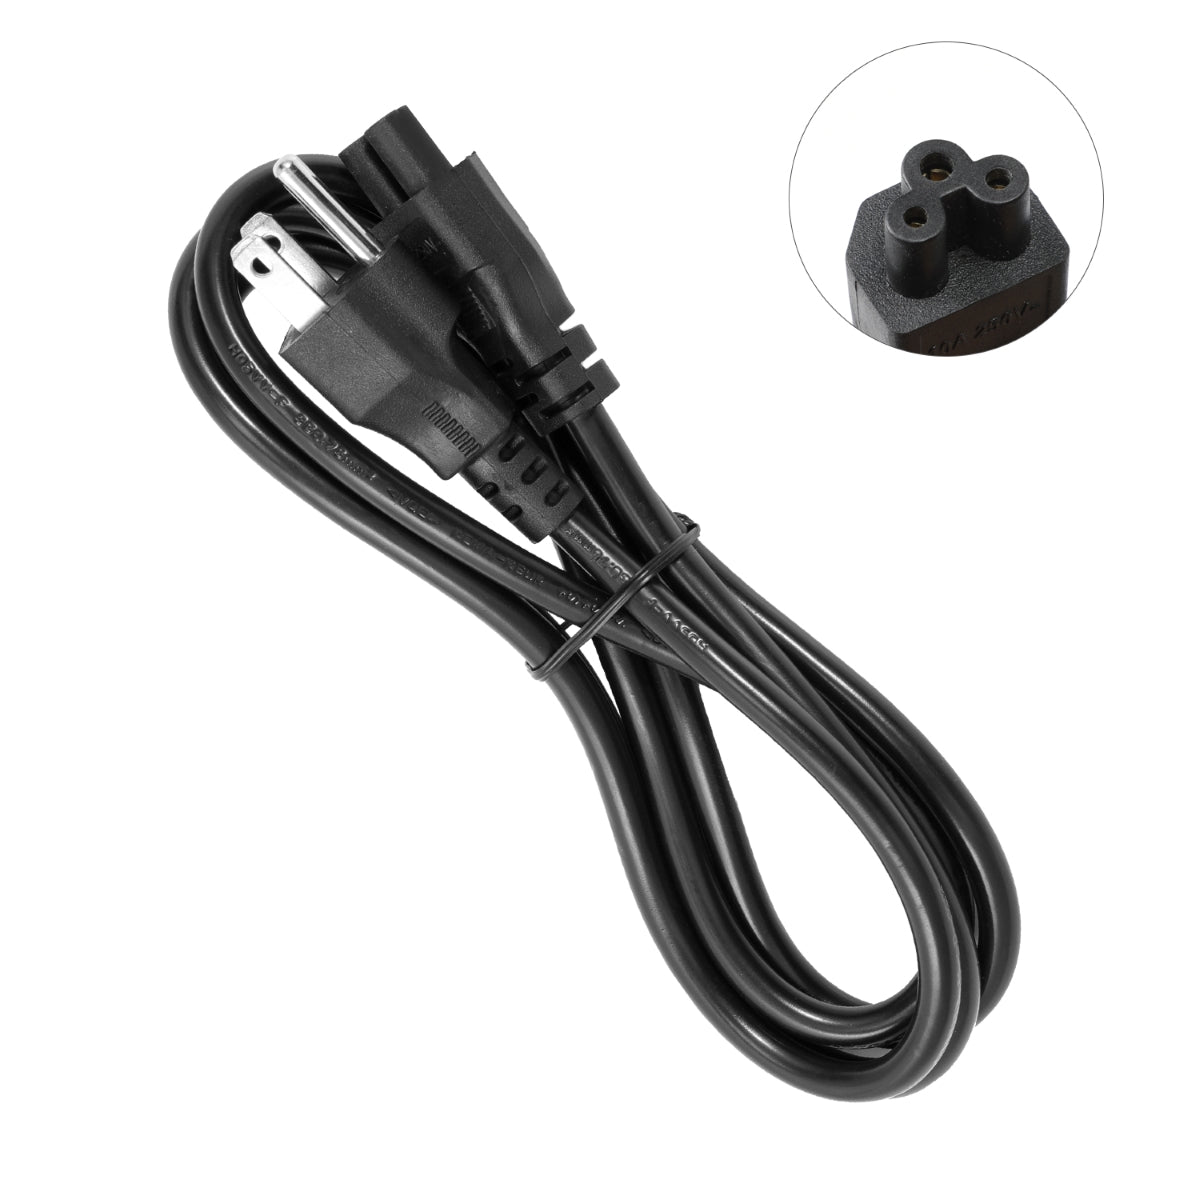 Power Cord for LG 55LF6100 Monitor.